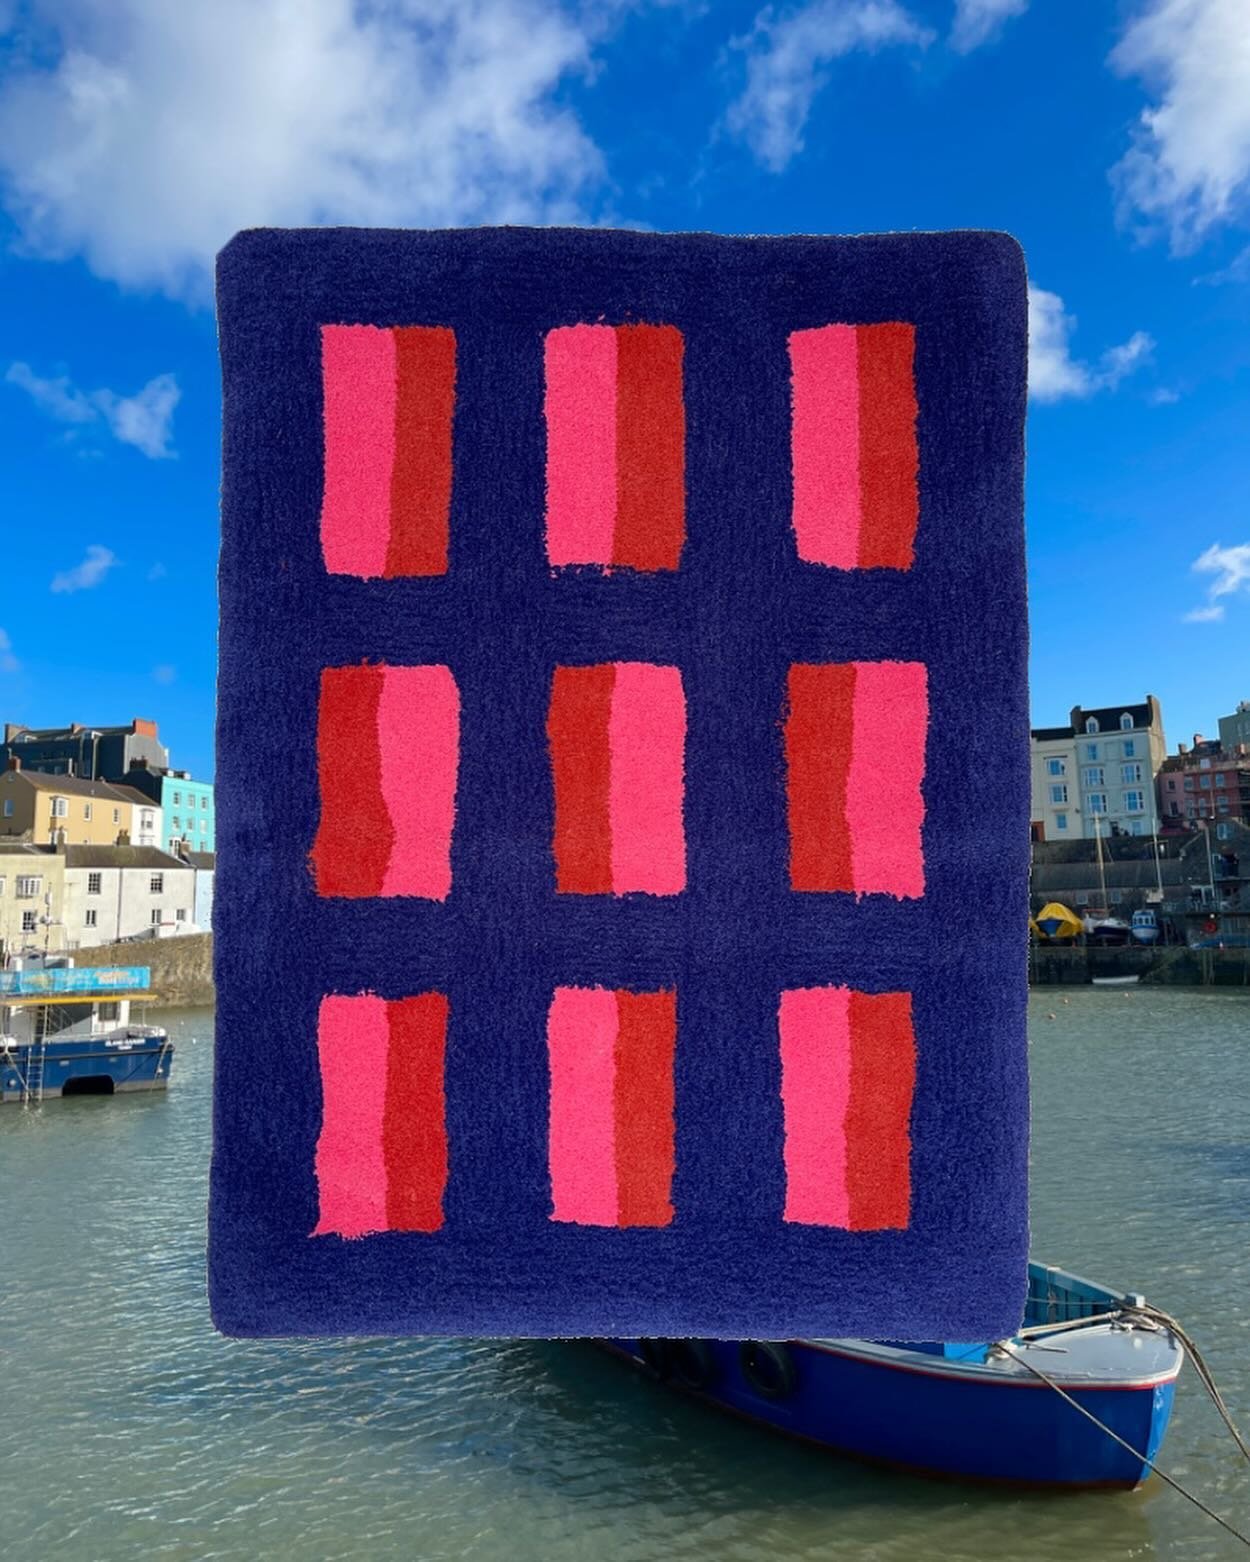 🎠What fun Tenby was! Especially the late night ghost walk! 
I love a walk around the harbor and seeing the tide come in and out. 

Here&rsquo;s the Albert rug inspire by the table colour of the Prince Albert in stroud and the colour of my jumper, yo